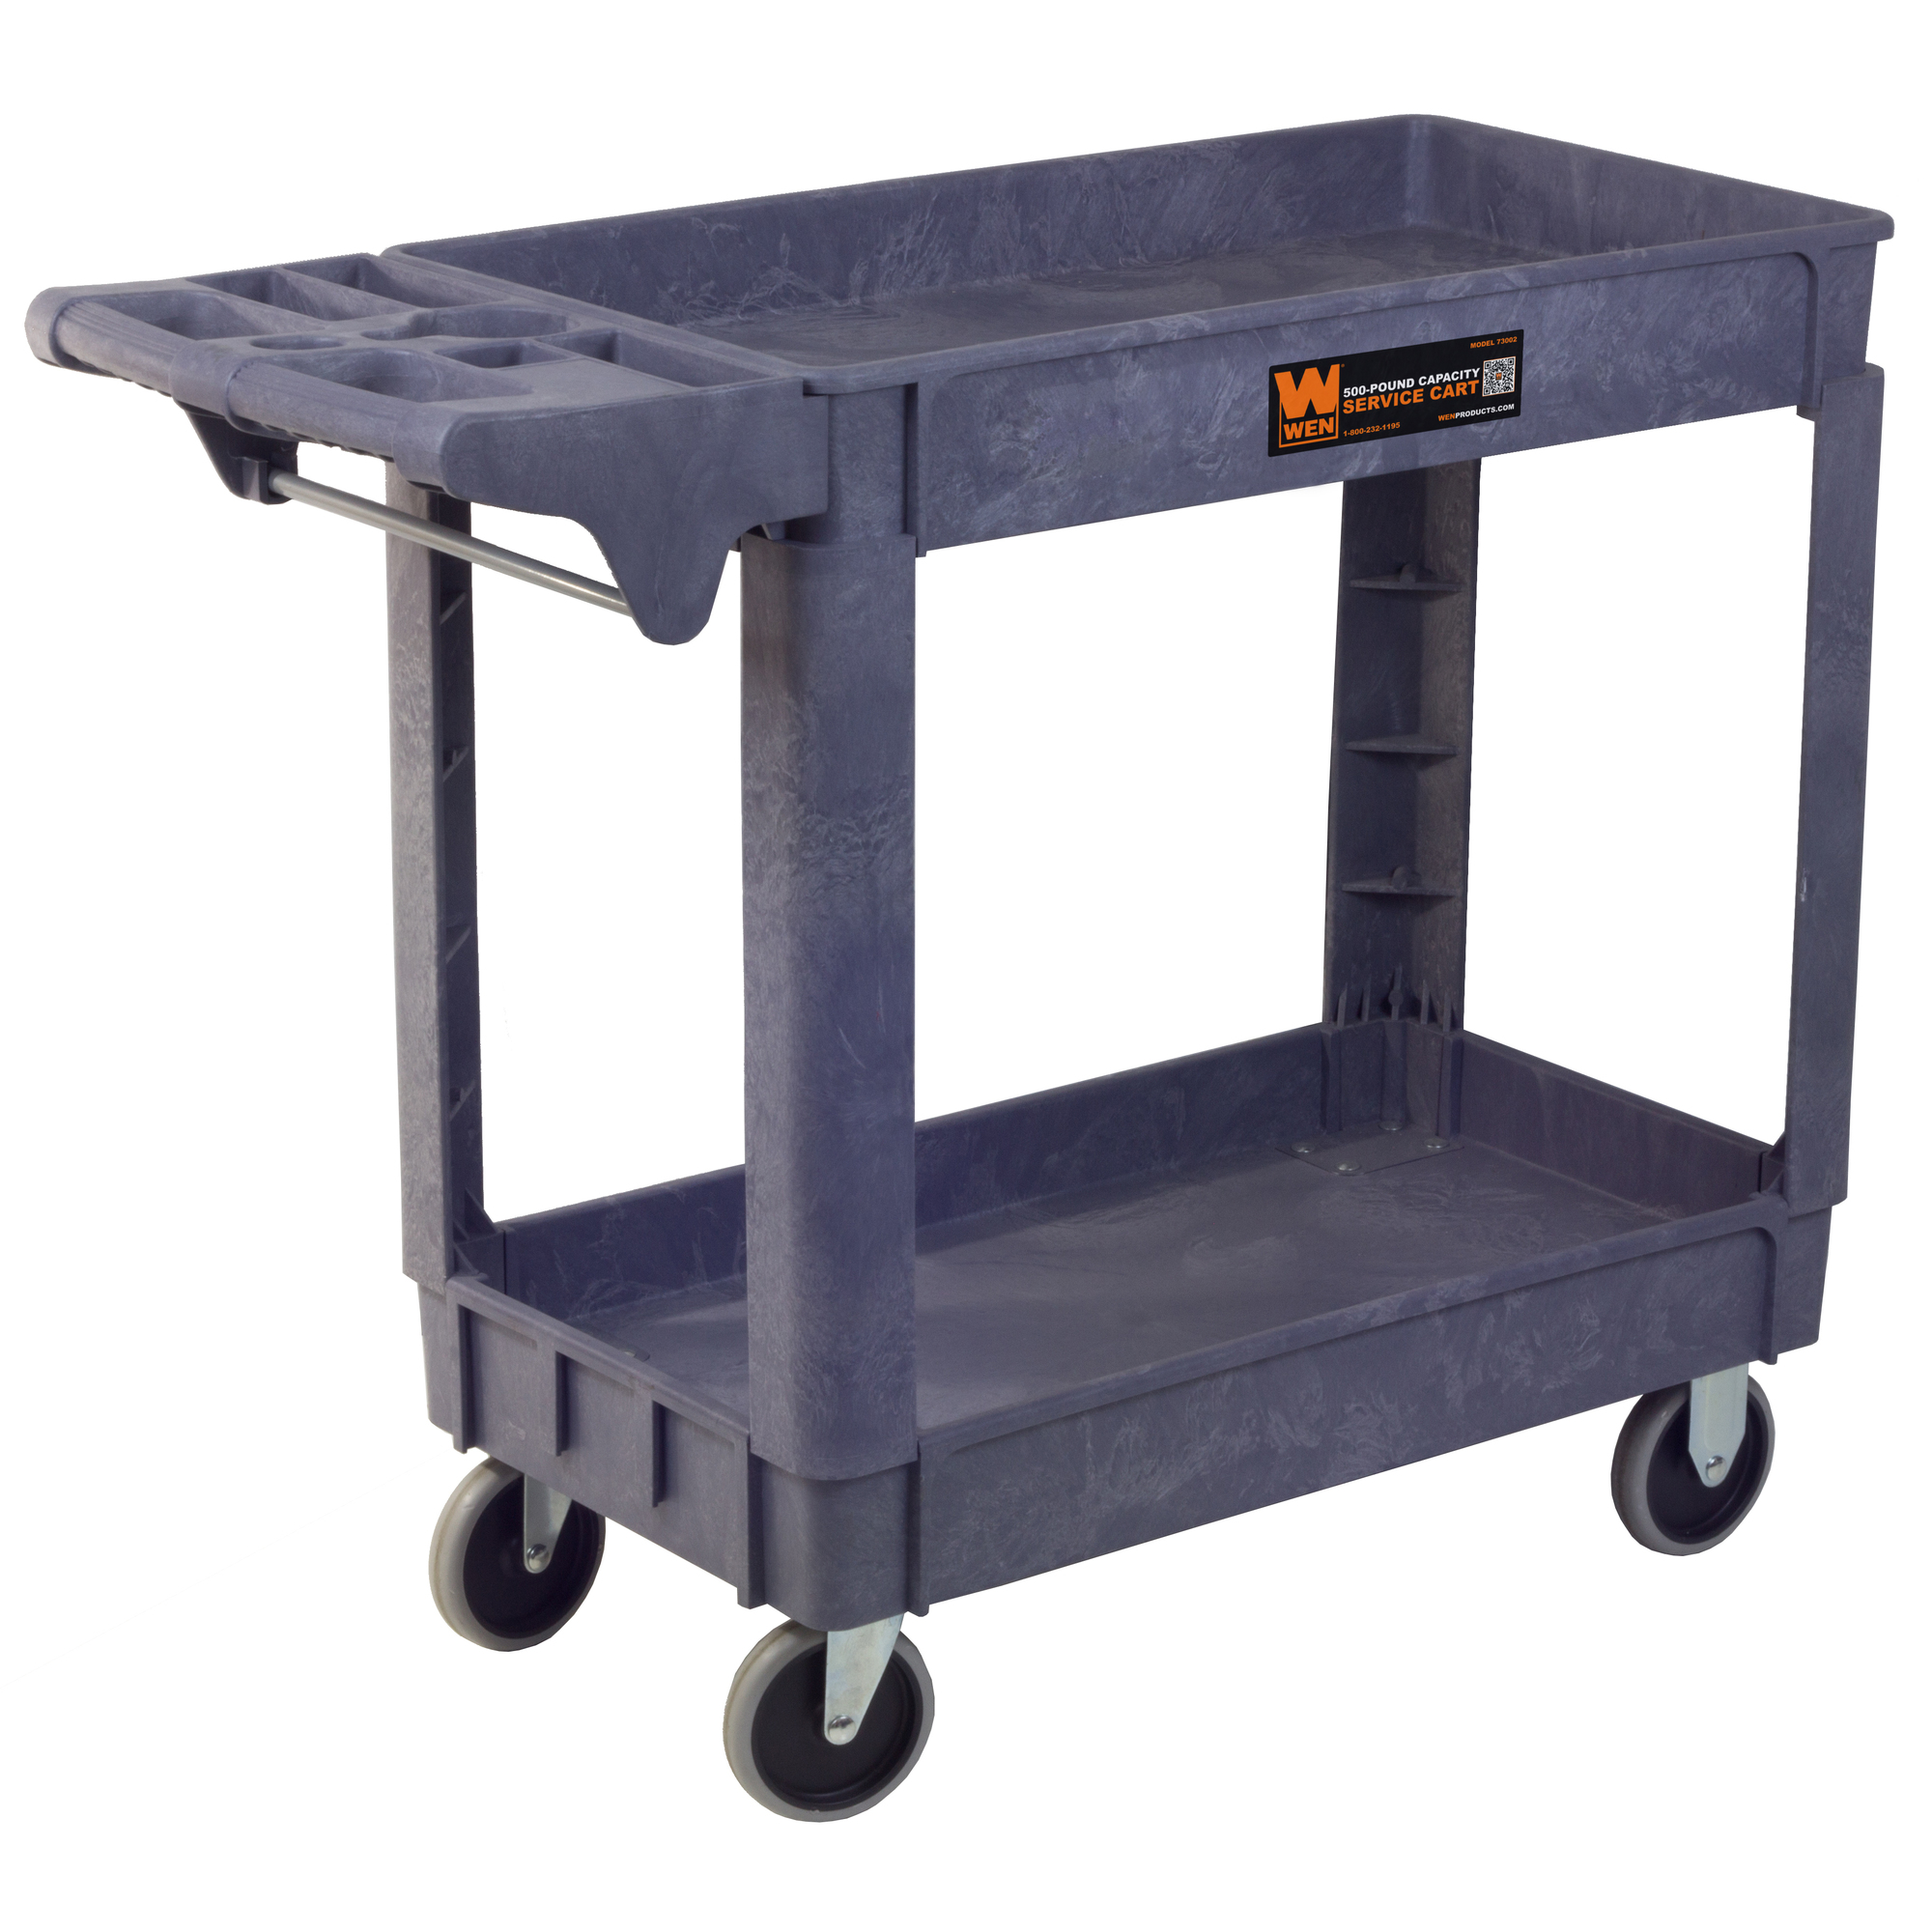 WEN, 500-Pound Capacity 40Inch x 17Inch Service Cart, Total Capacity 500 lb, Material Polypropylene, Model 73002